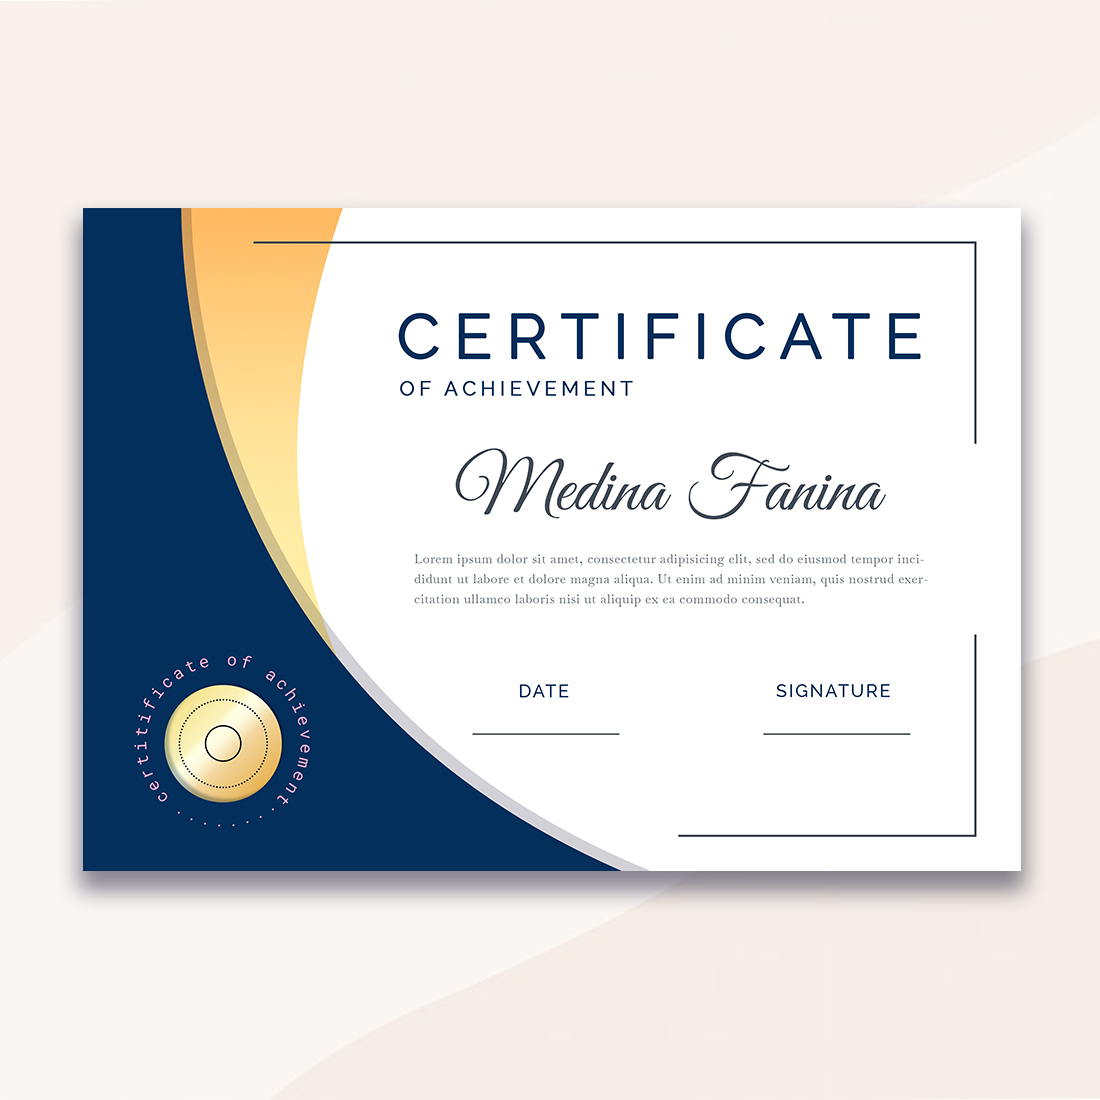 2 Elegant Certificate Template with golden details cover image.